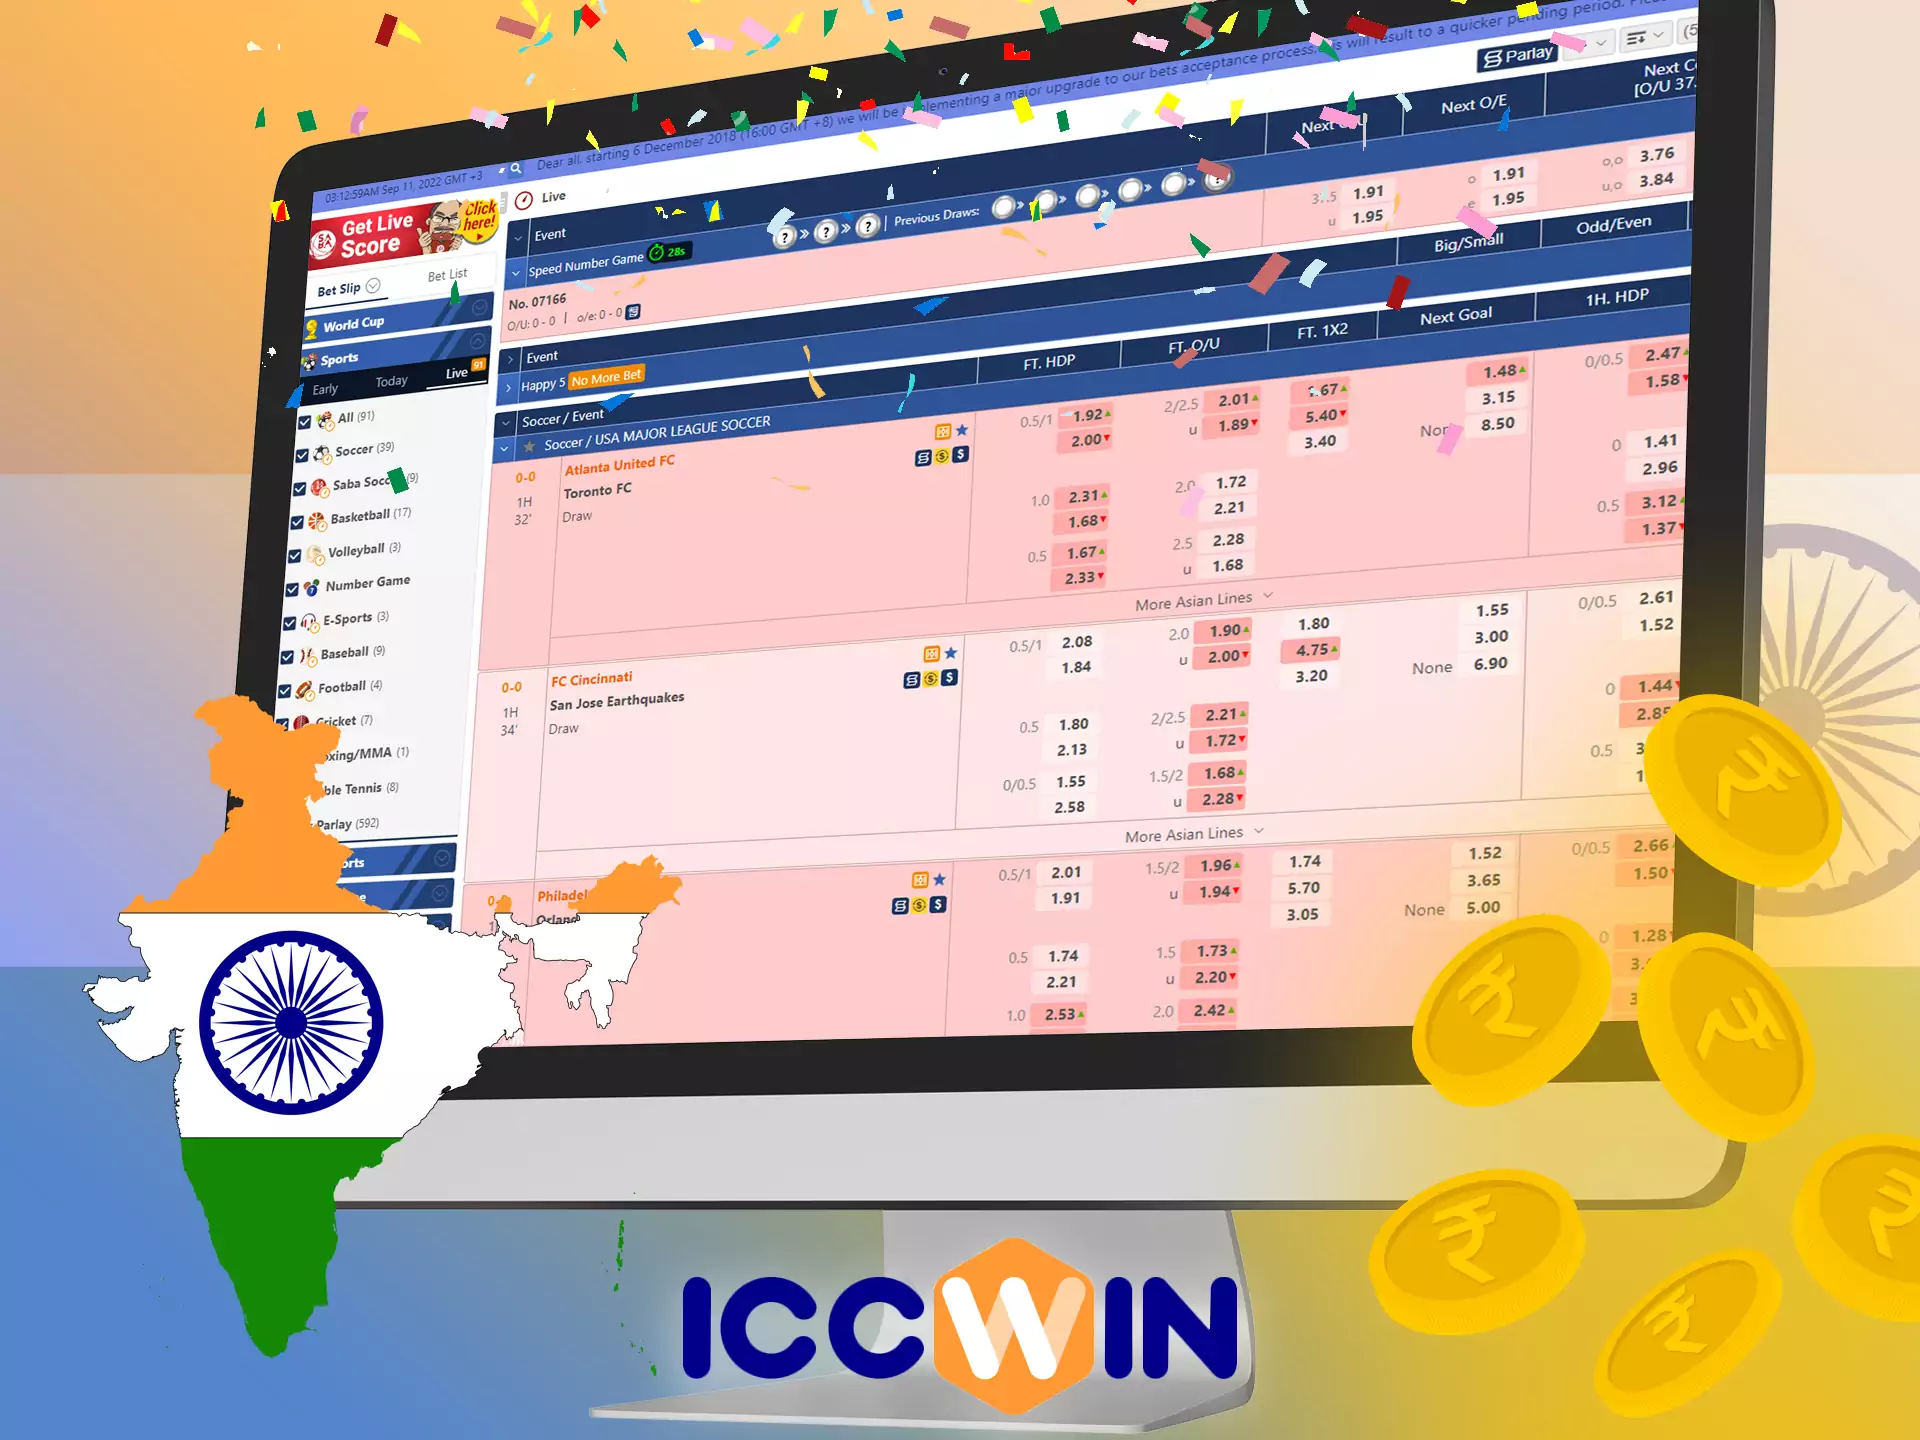 ICCWin is an Indian bookmaker that accepts rupees and payments from the most popular Indian systems.